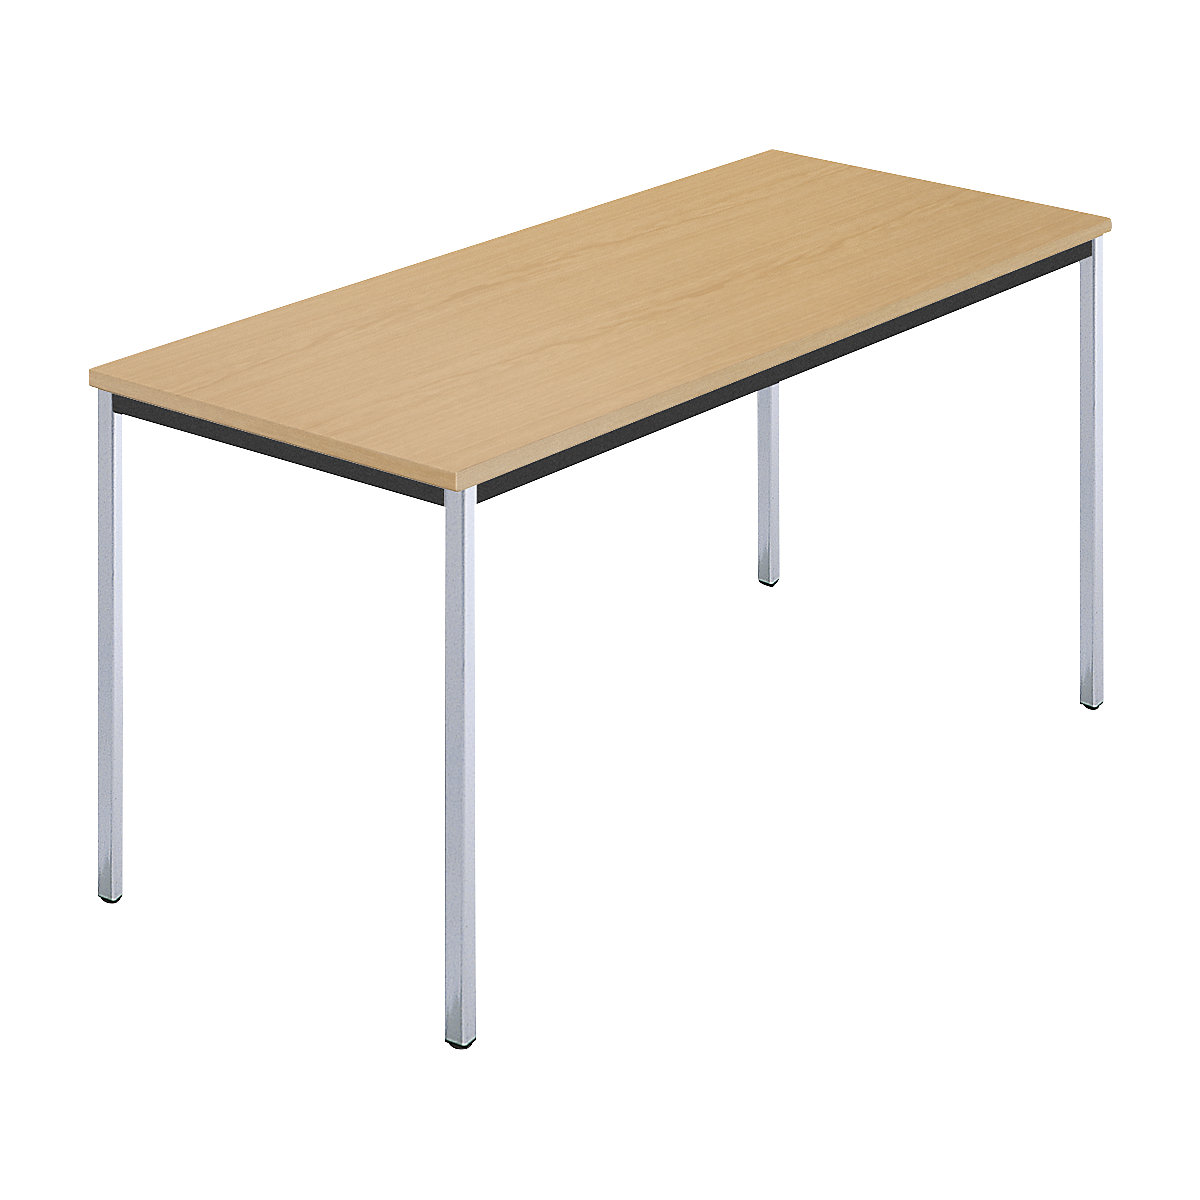 Rectangular table, square tubular steel chrome plated, WxD 1400 x 700 mm, natural beech finish-5